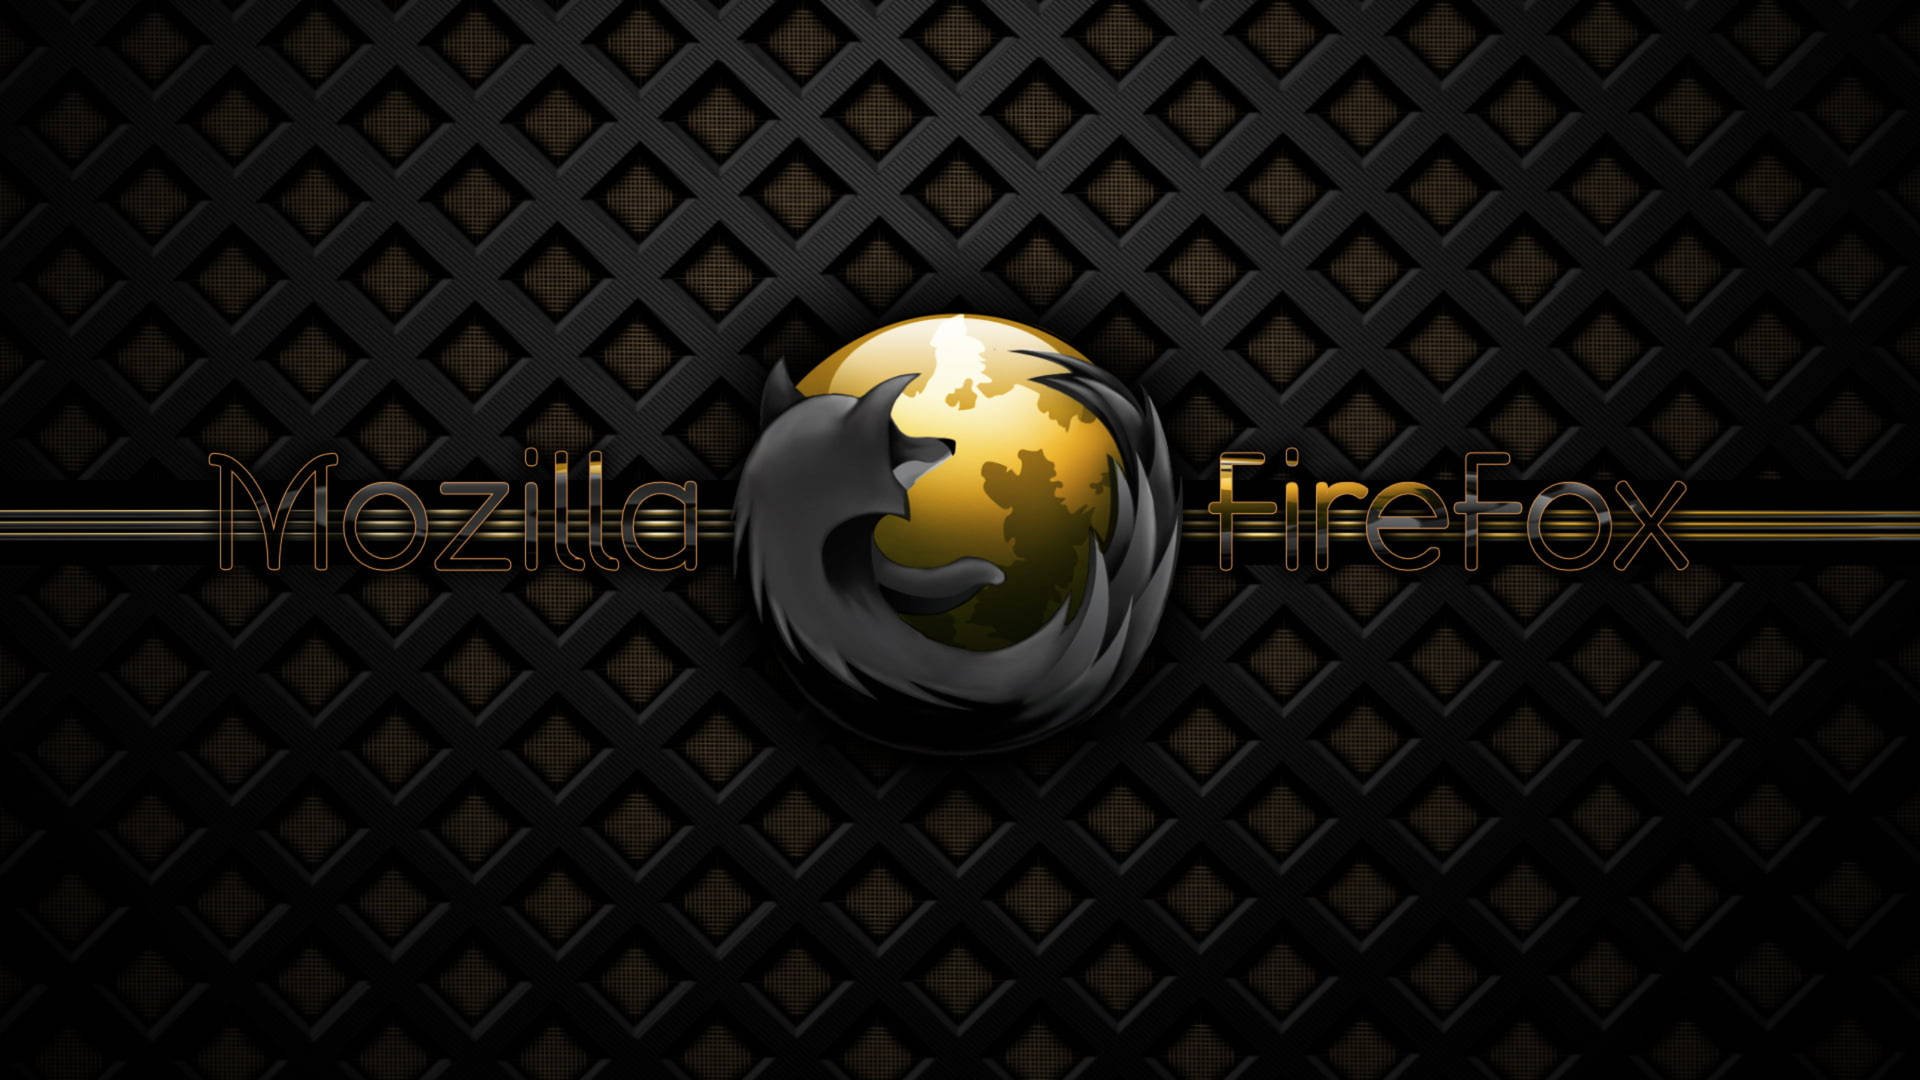 Mozilla Firefox In Black And Gold